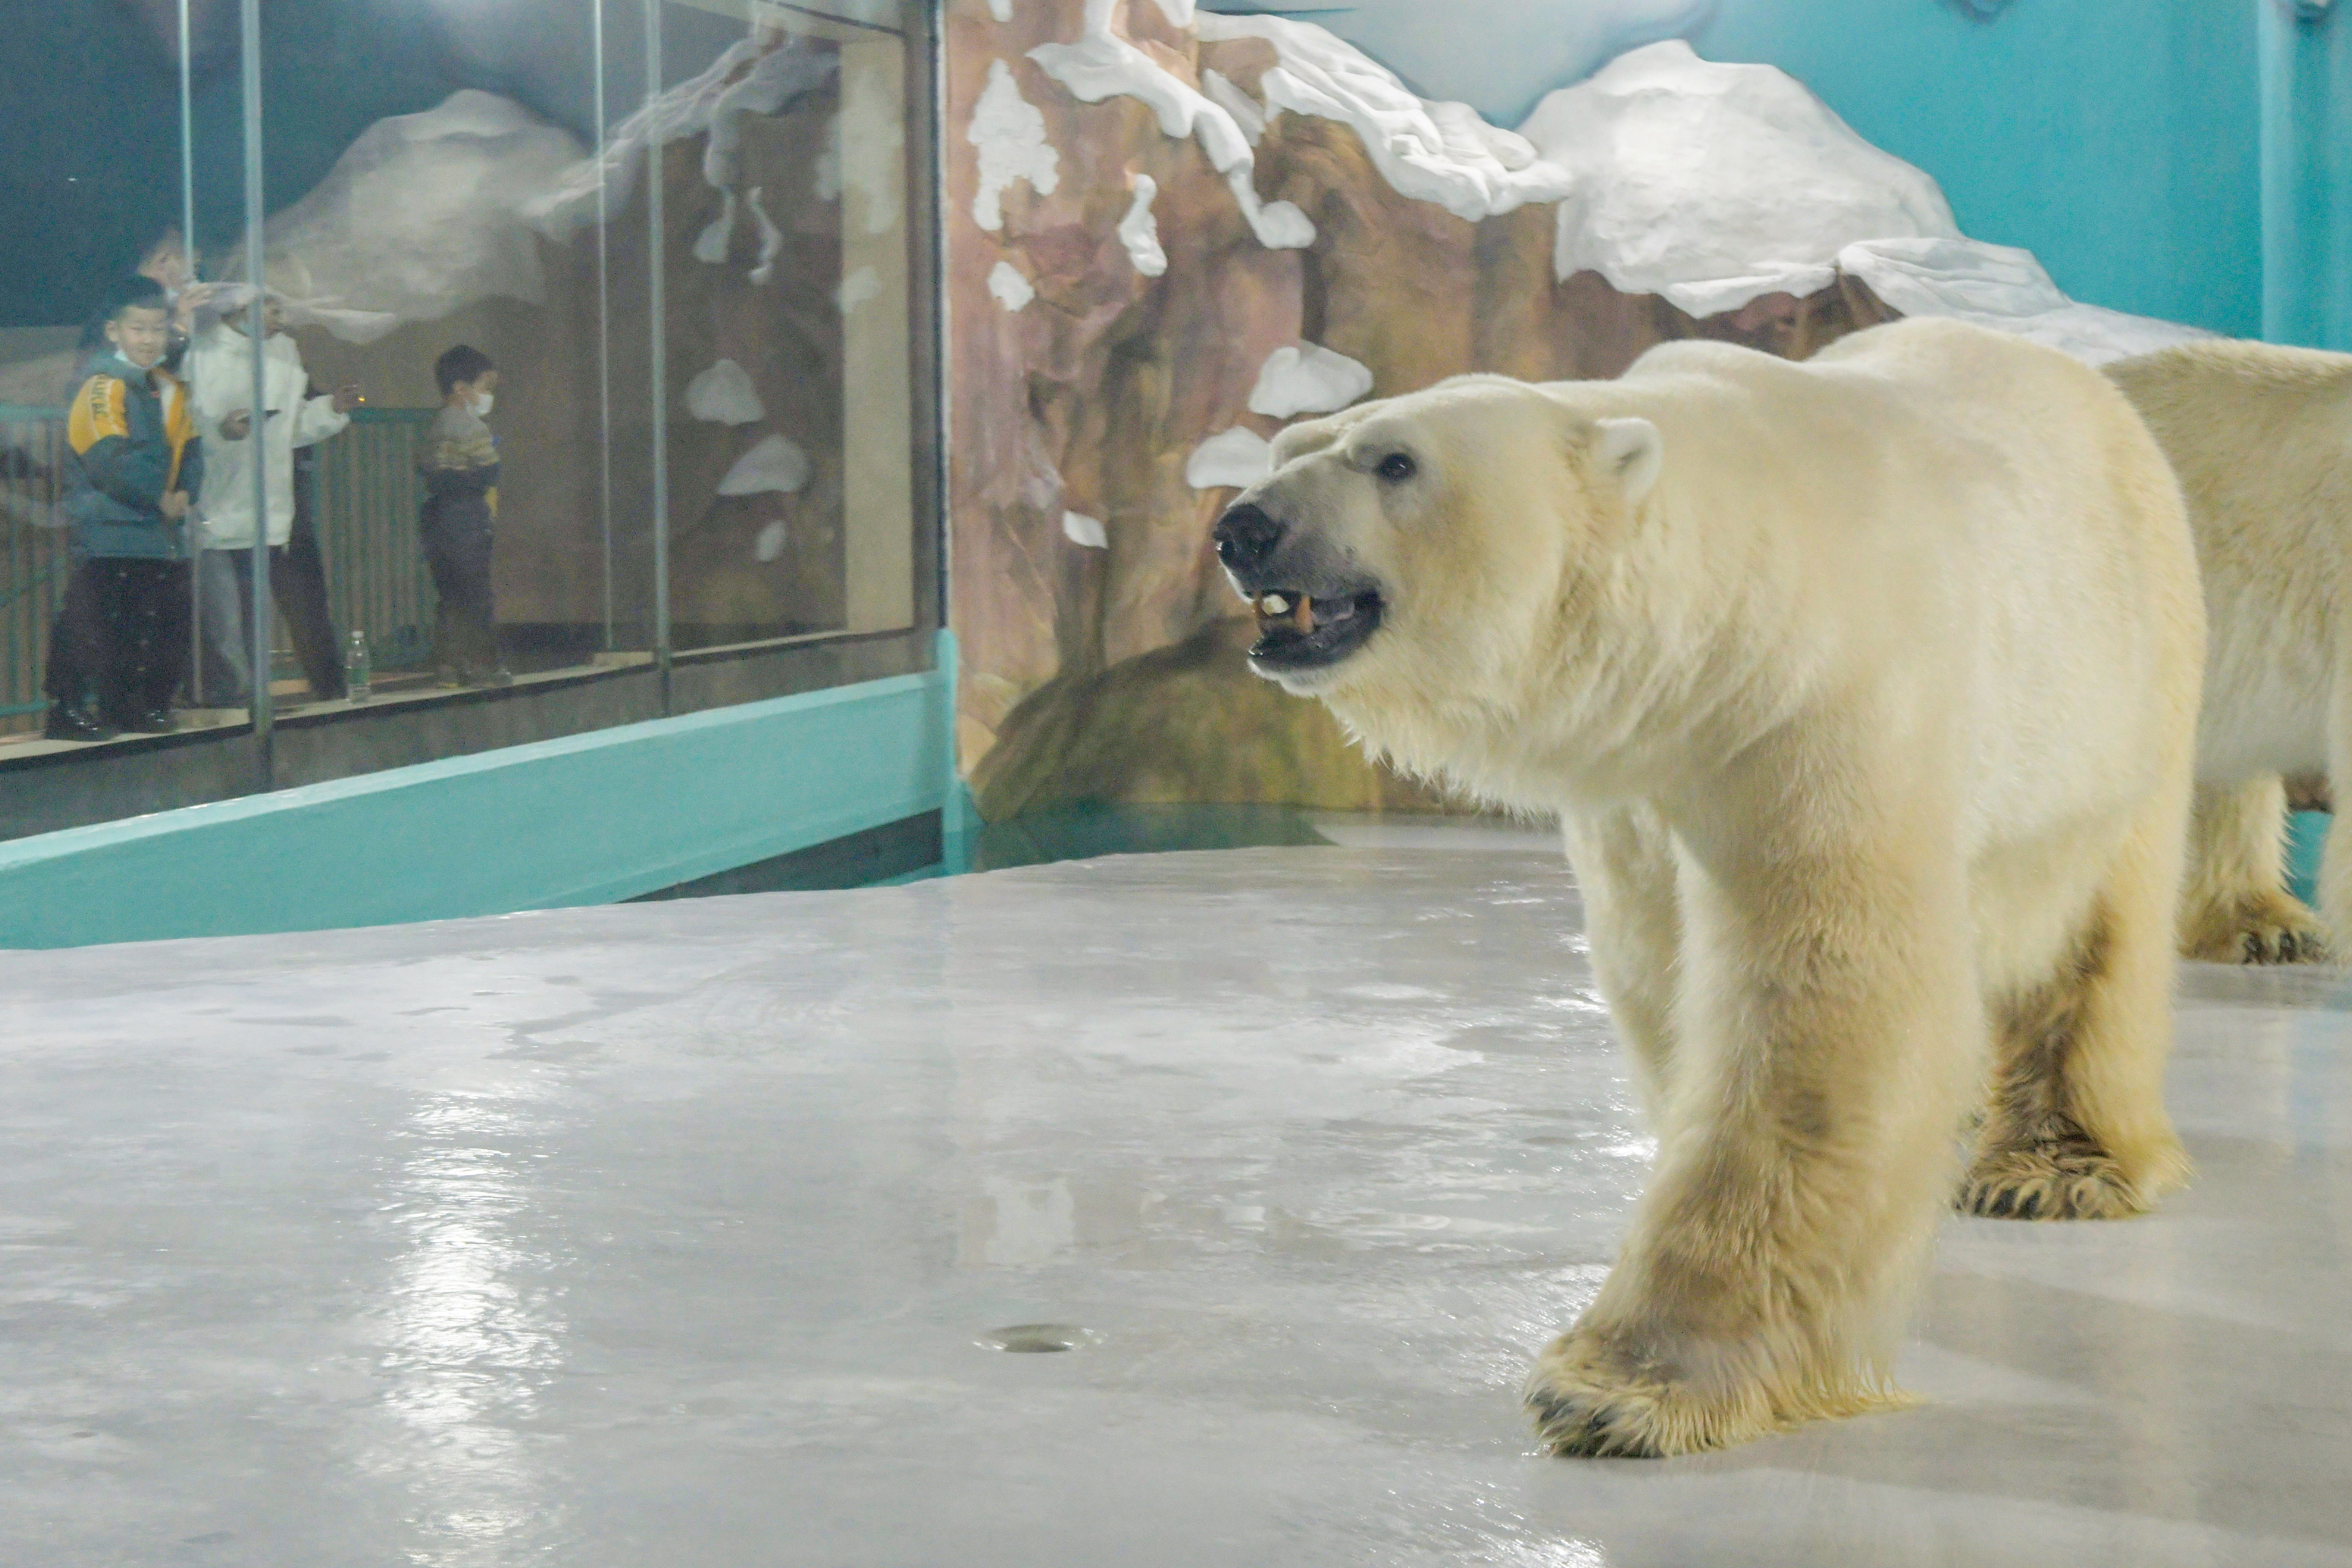 Polar bear is seen at an enclosure inside a hotel at a newly-opened polarland-themed park in Harbin